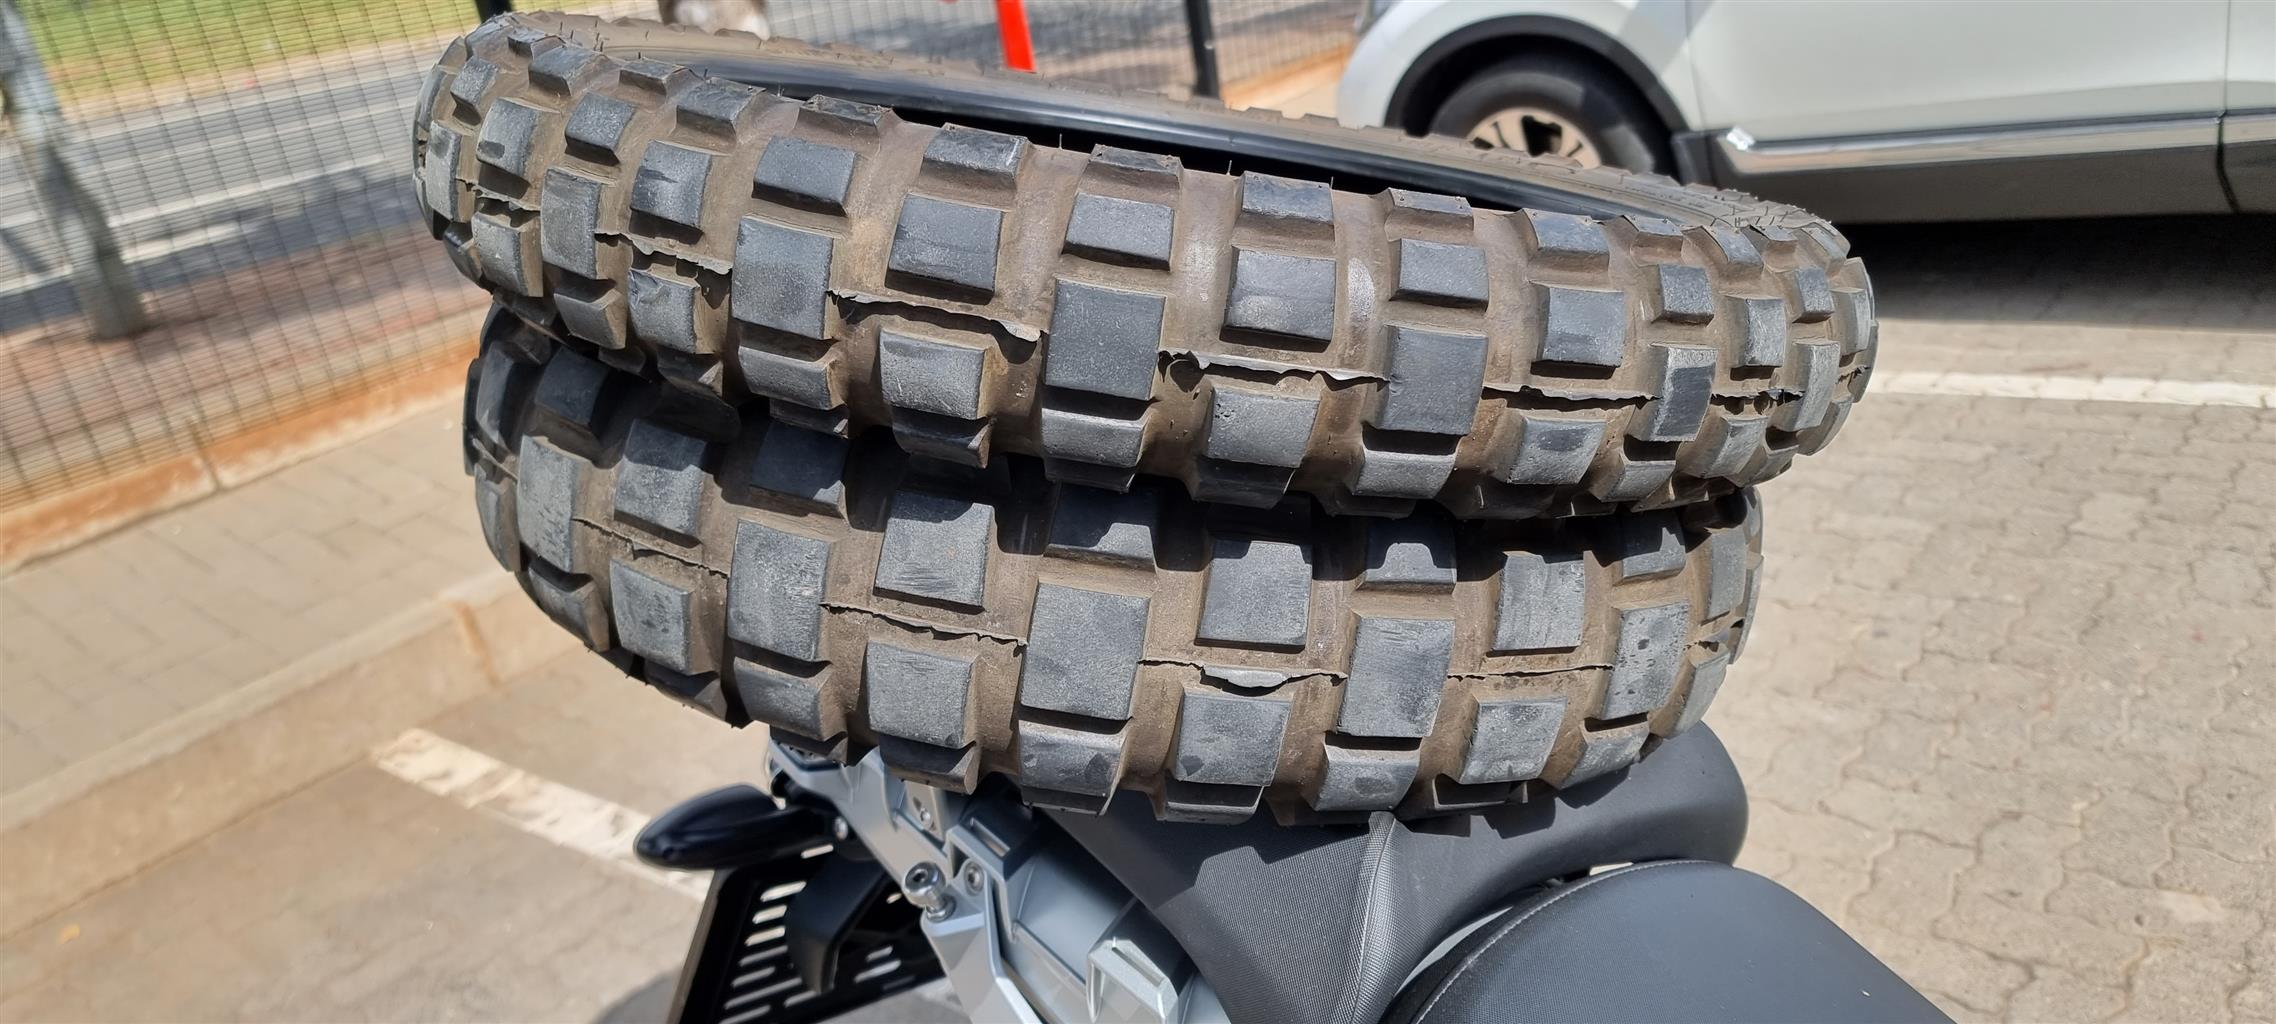 BMW R1200GS Motorcycle used Offroad/ knobby Tyres